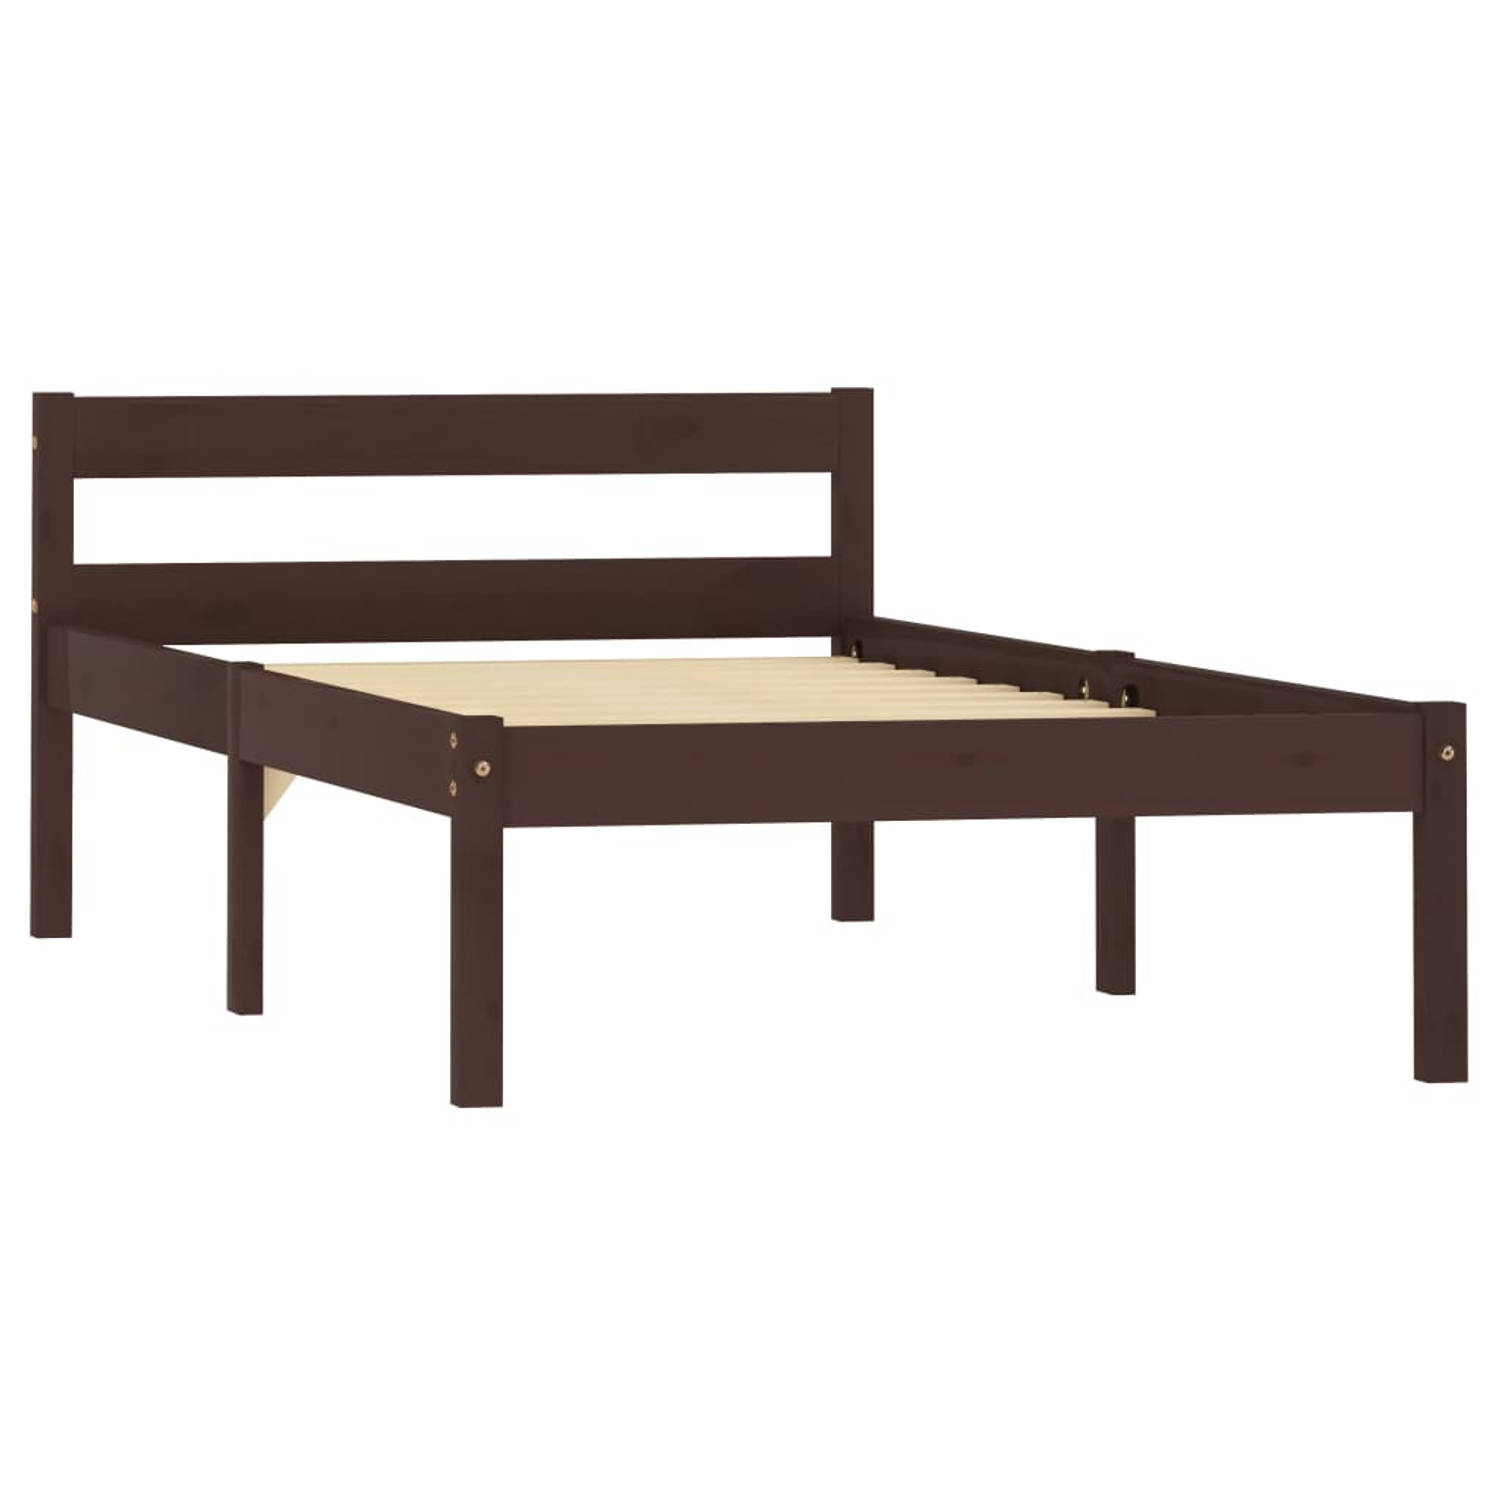 The Living Store Bedframe massief grenenhout donkerbruin 100x200 cm - Bed